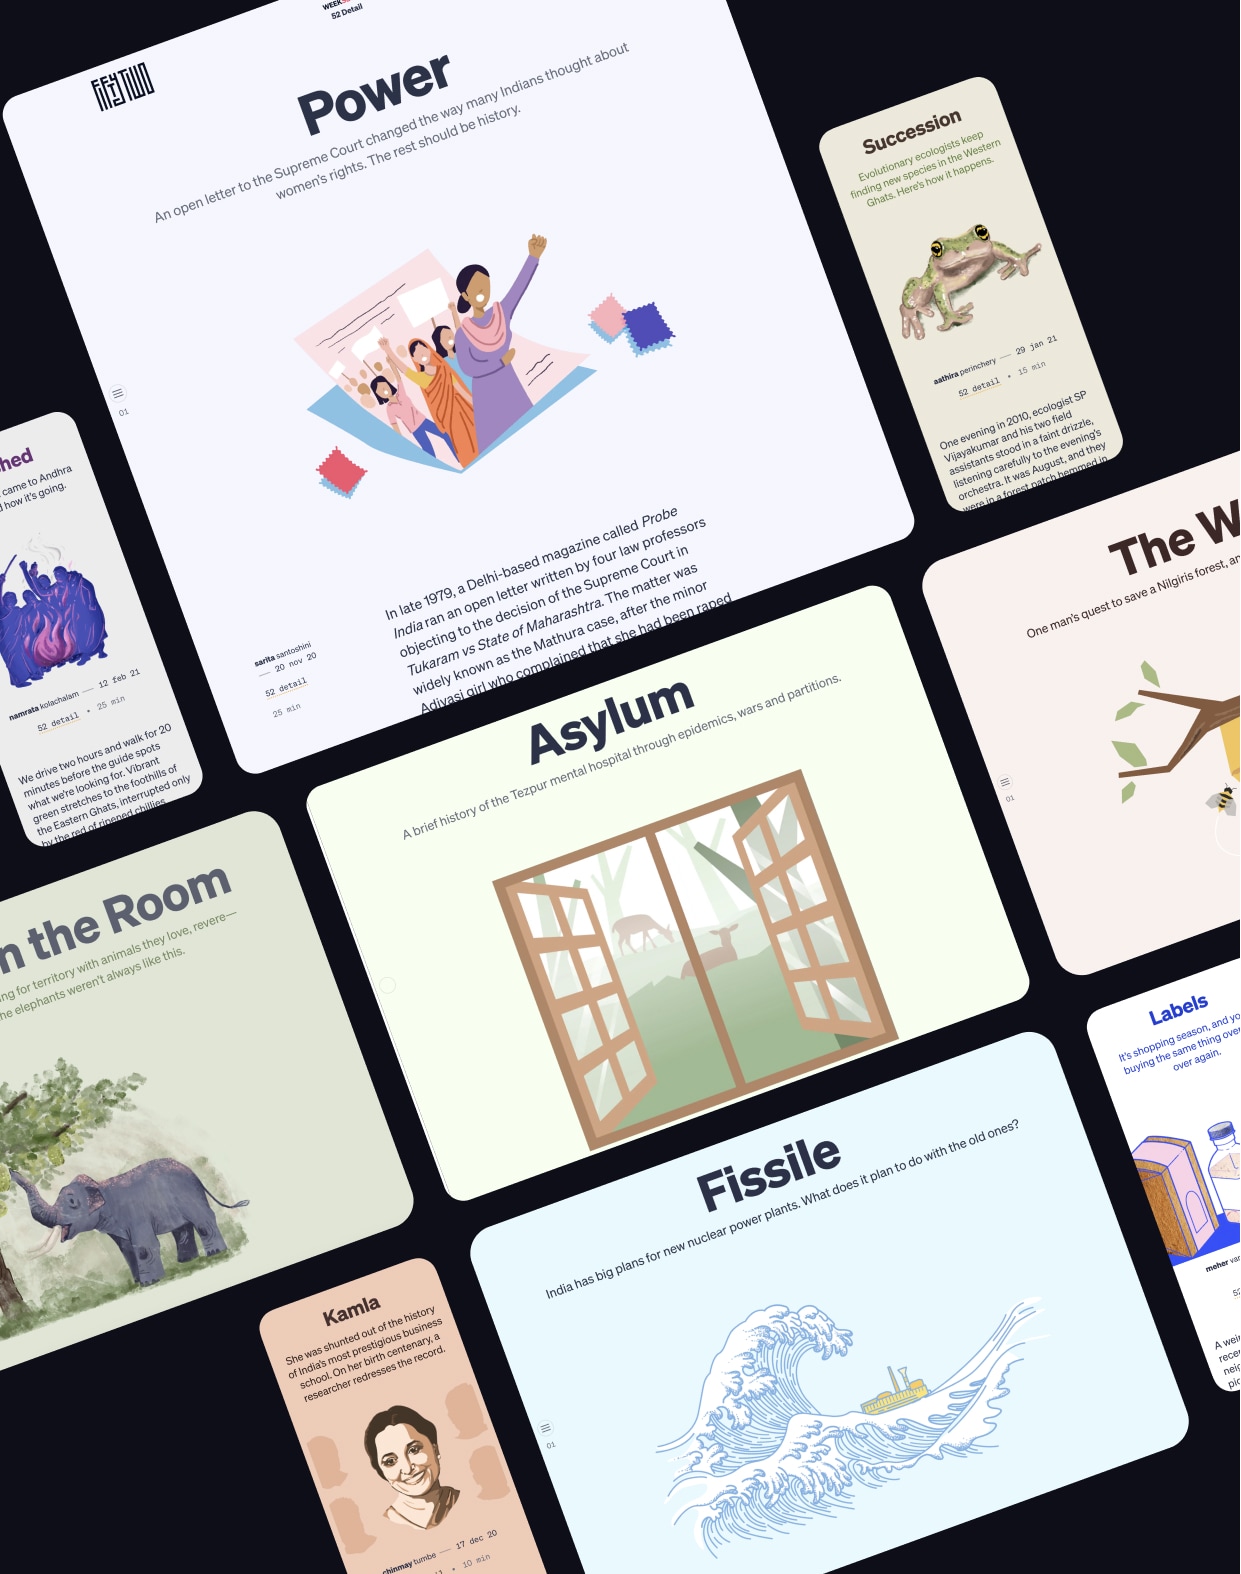 In 2020, we collaborated with AllThingsSmall to design, FiftyTwo, an online long-form journalism magazine publishing one story every week from South Asia.